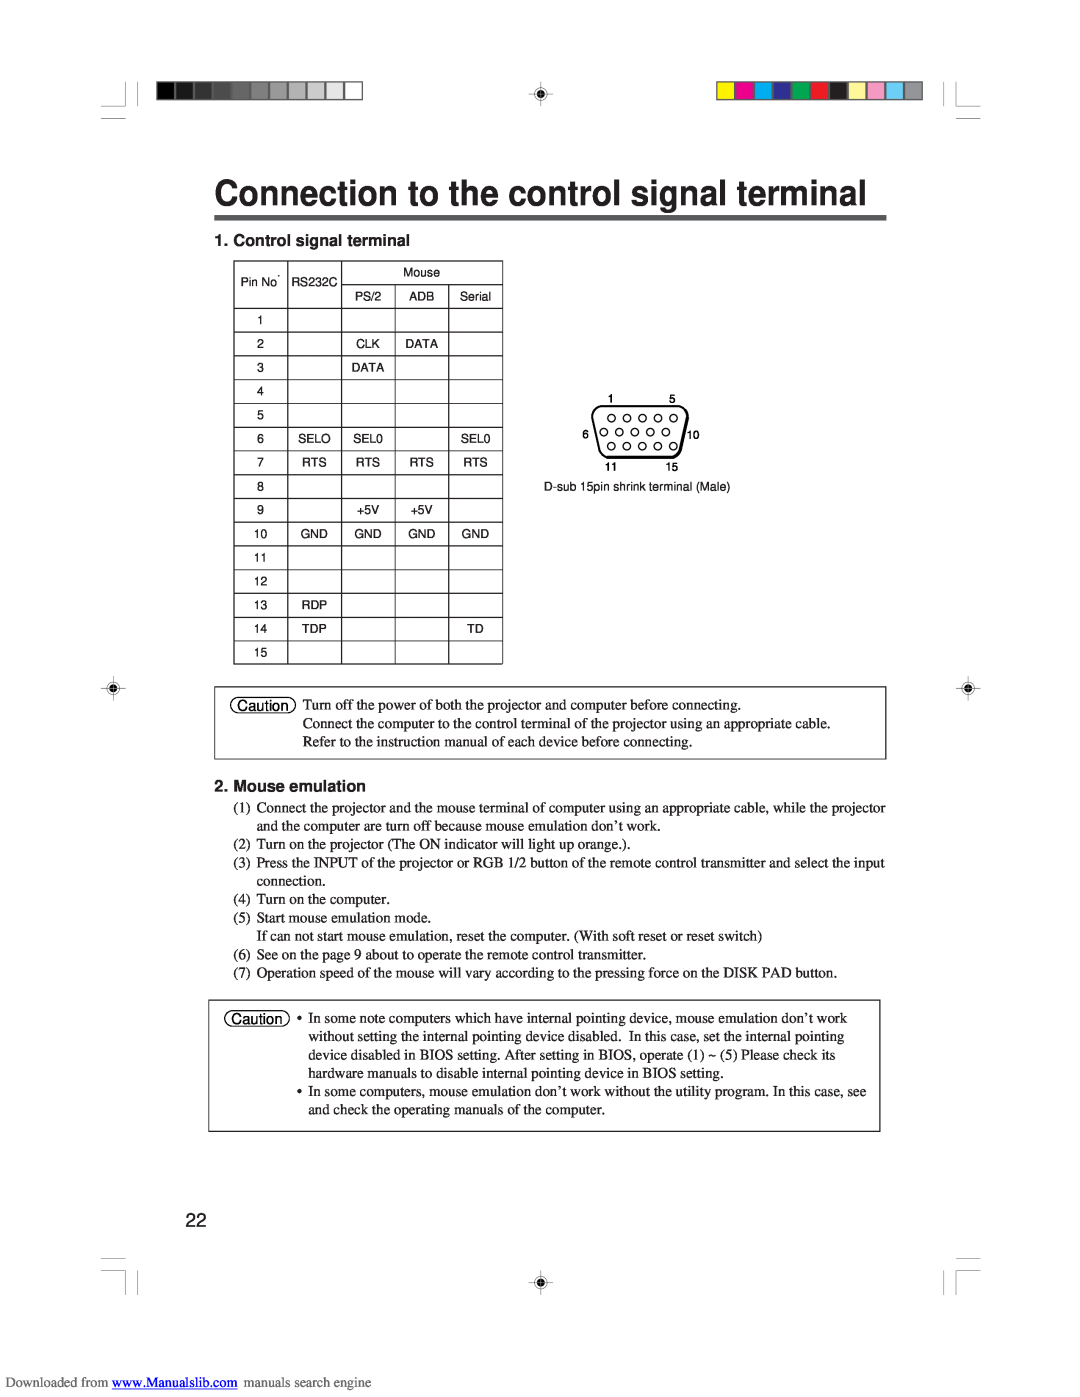 Hitachi CP-X955E specifications Connection to the control signal terminal, Control signal terminal, Mouse emulation 